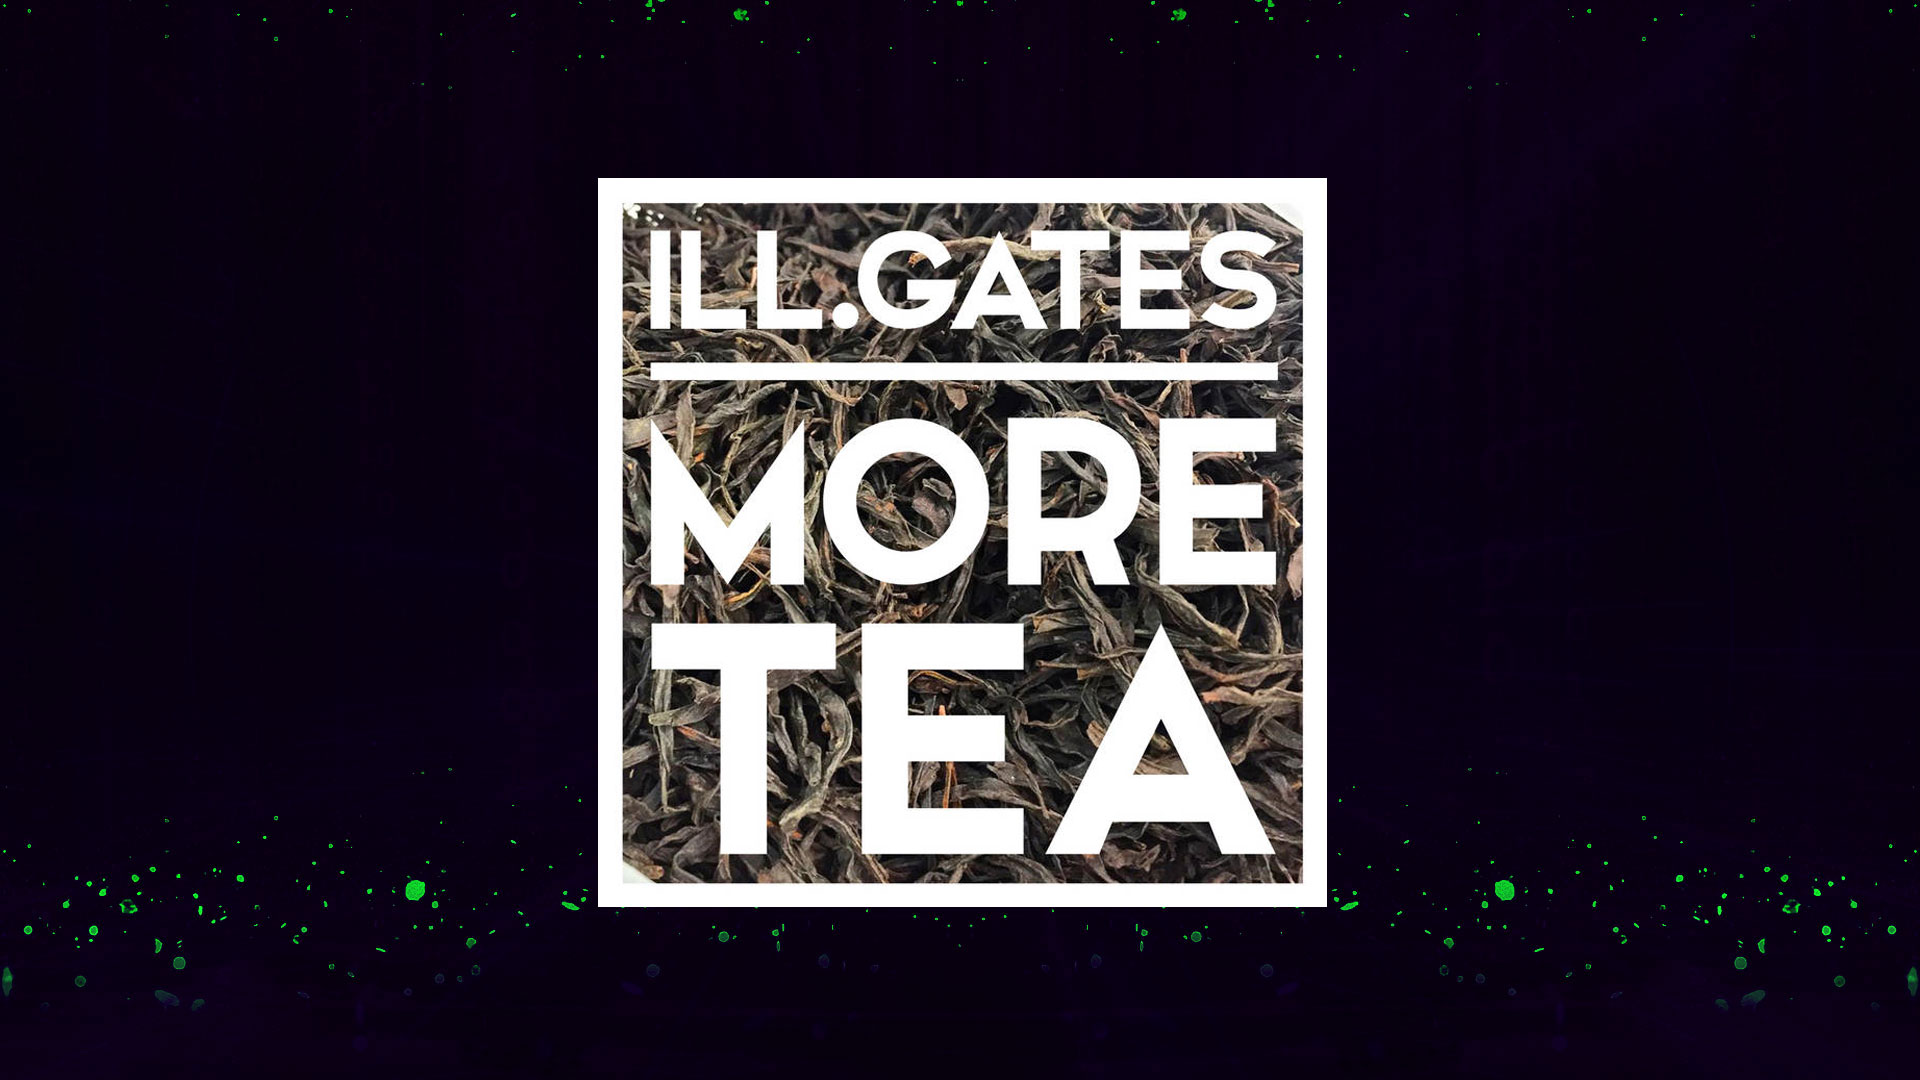 New EDM Hits More Tea by iLL.Gates with remixes.